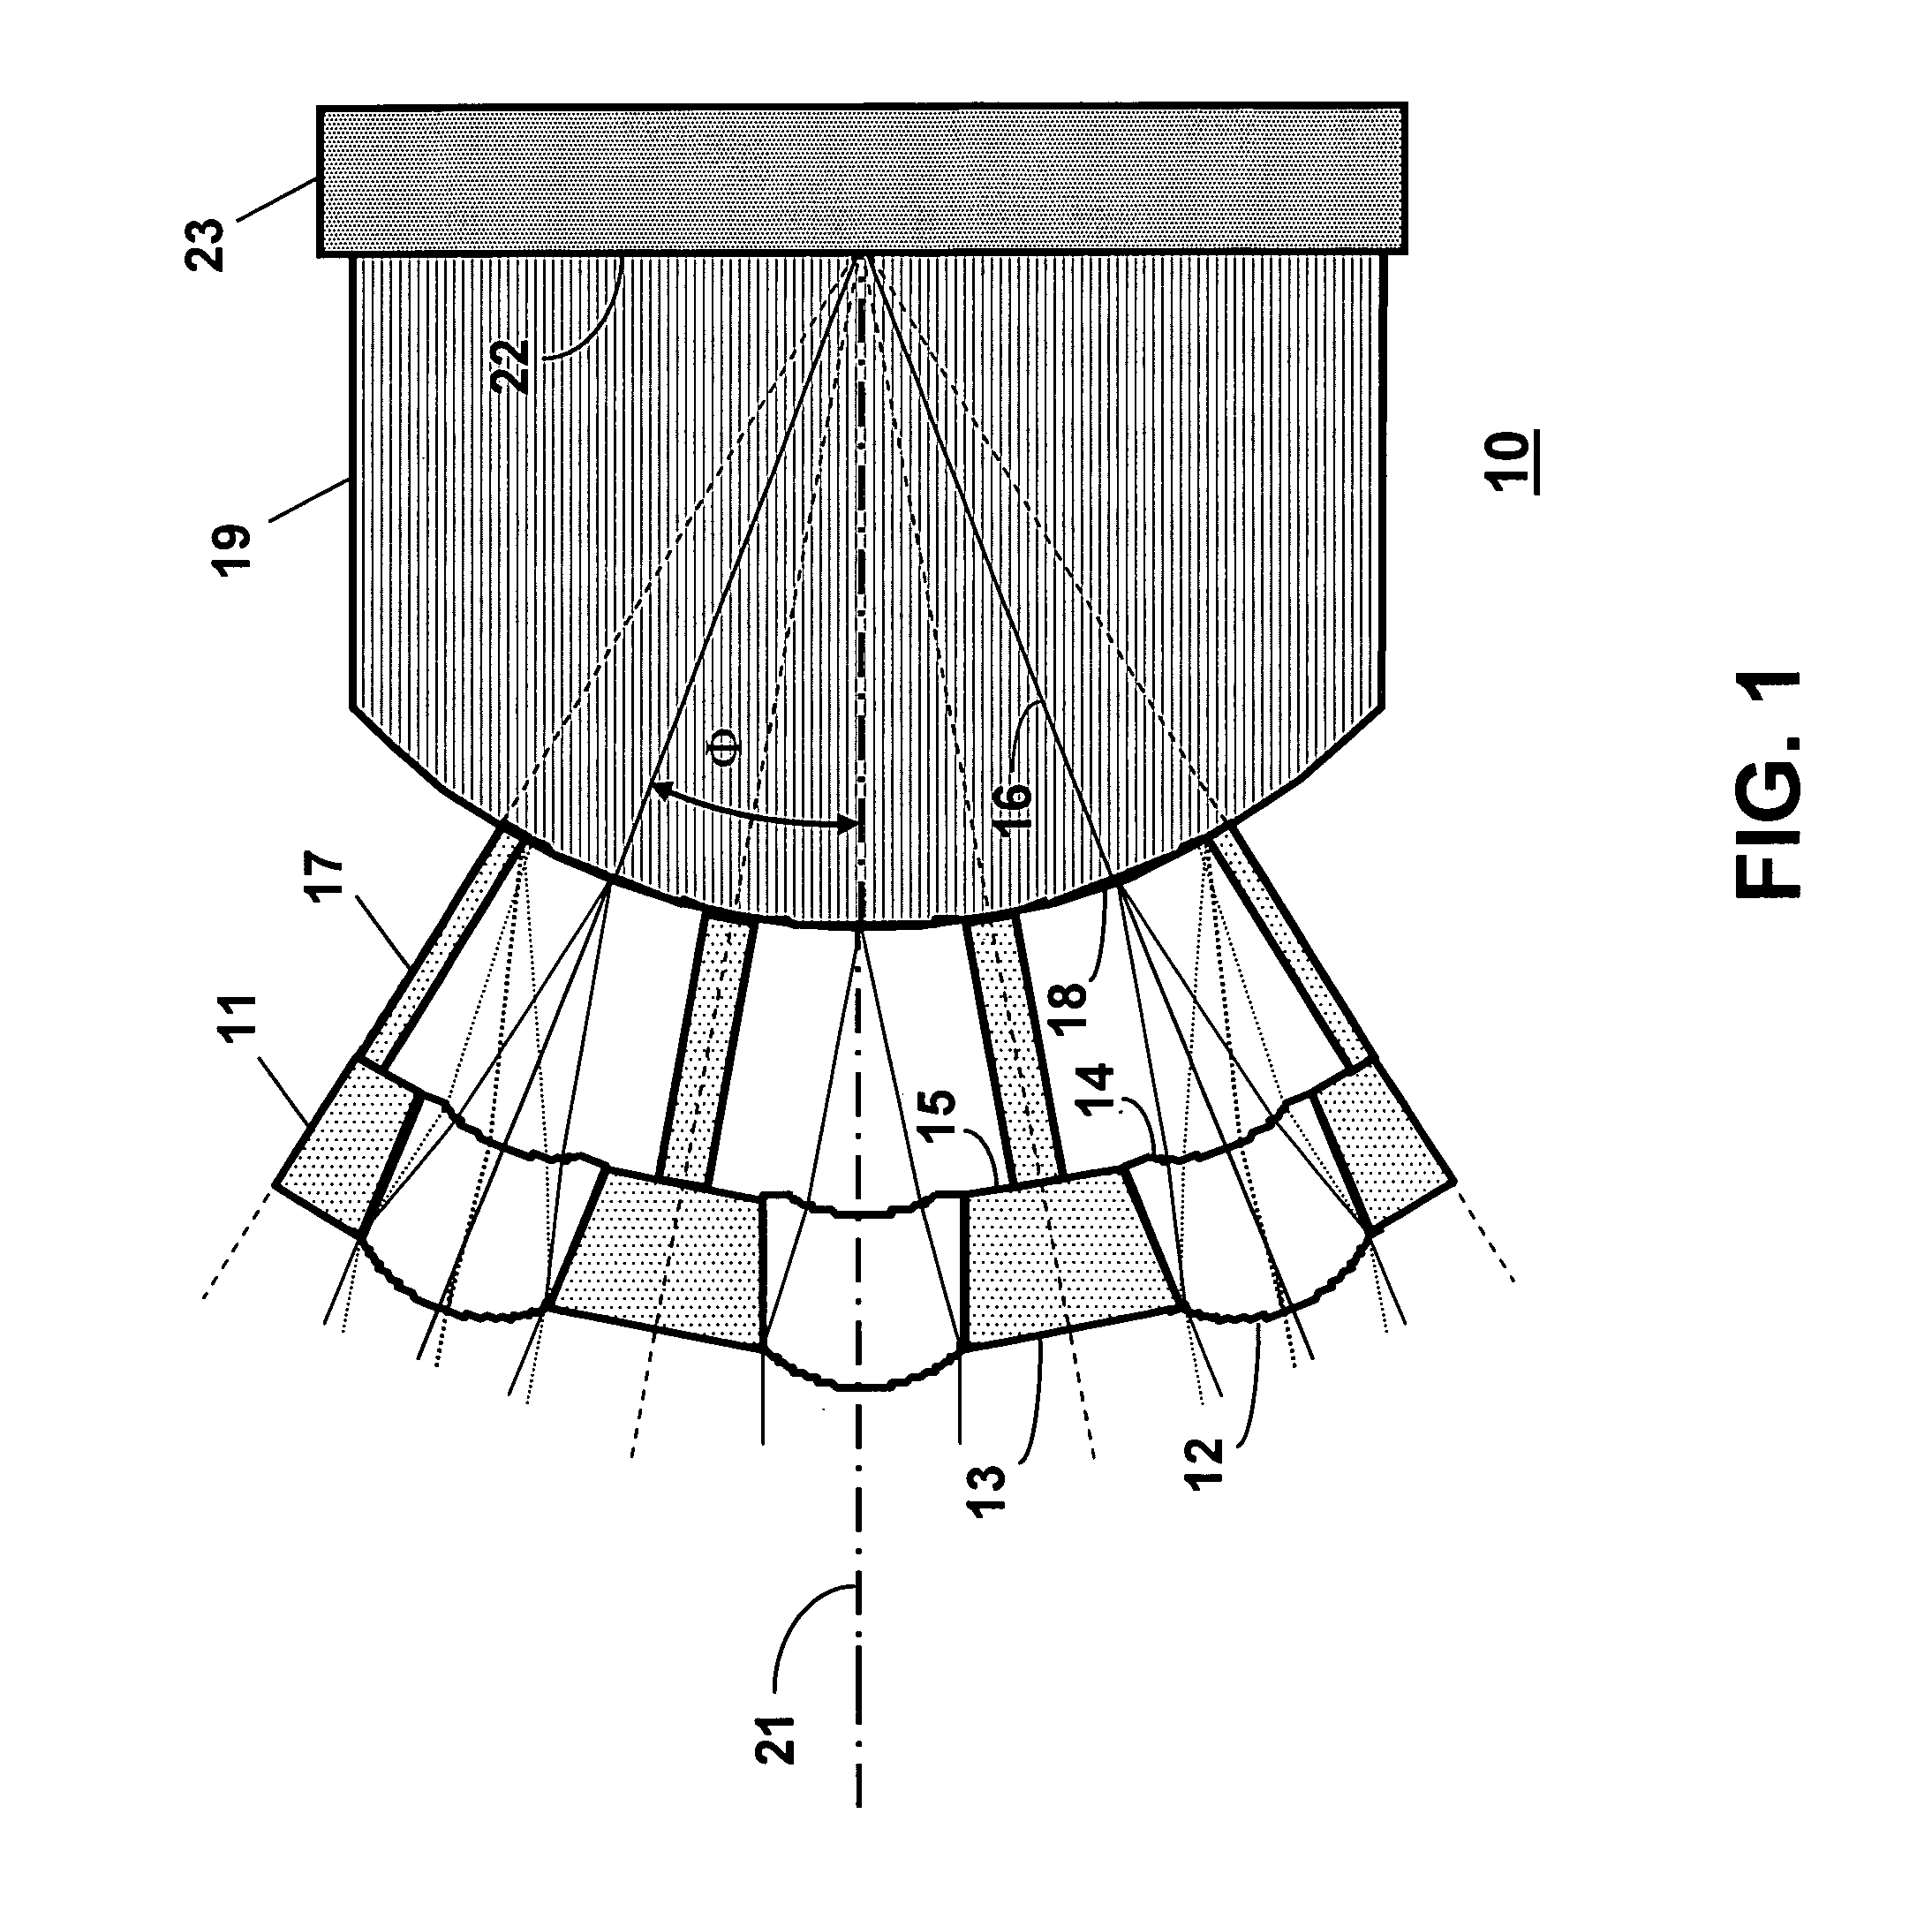 Microoptical compound lens